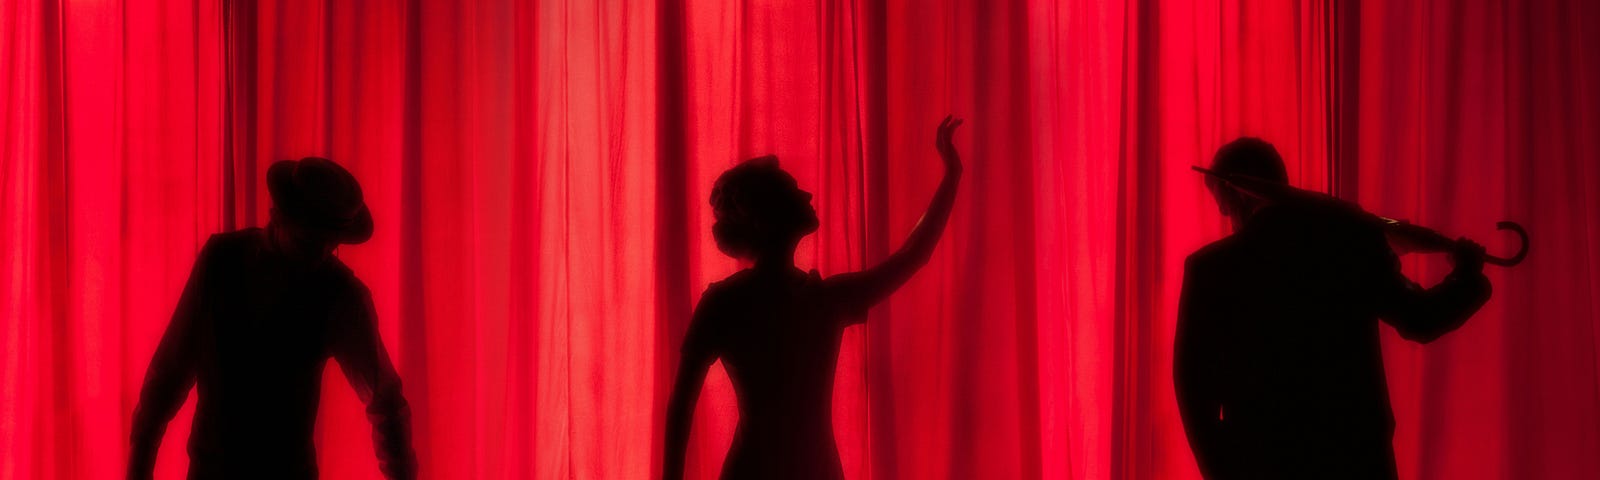 The silhouettes of three people in front of a red curtain. It looks to be two men dressed in dapper suits (complete with a hat on the left and an umbrella on the right) flanking either side of a woman in a dress and heels. She is reaching her left hand up and looking up in that direction.